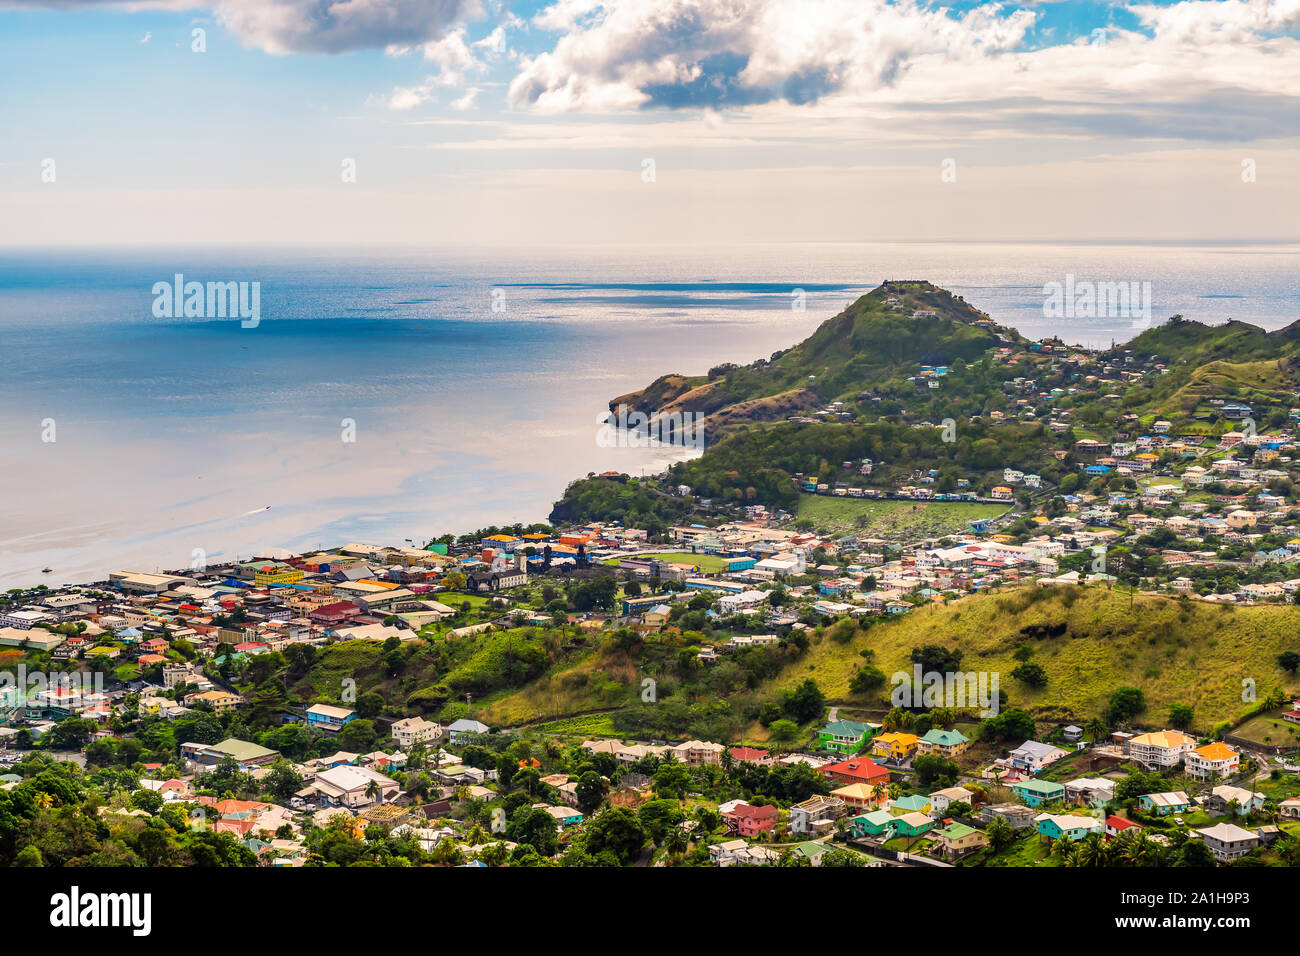 Saint Vincent and the Grenadines. Landscape and port city of Kingstown. Stock Photo